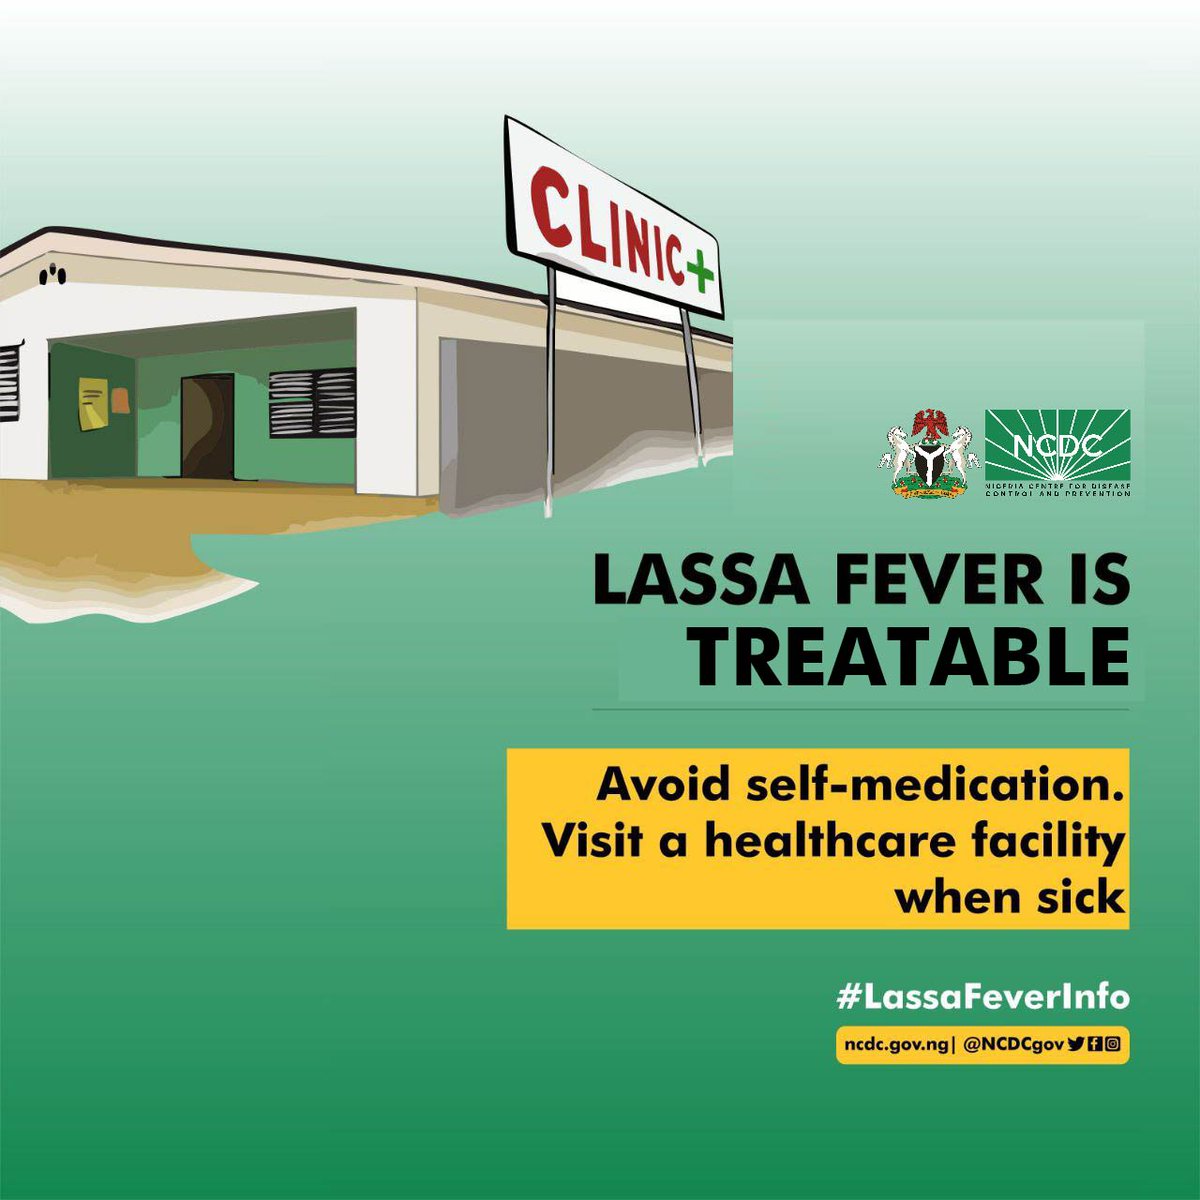 #LassaFever is treatable. Report early to a healthcare facility when experiencing #LassaFever-associated symptoms. Early symptoms include fever, body weakness, sore throat, muscle & chest pain, nausea, vomiting, diarrhoea, cough & abdominal pain.